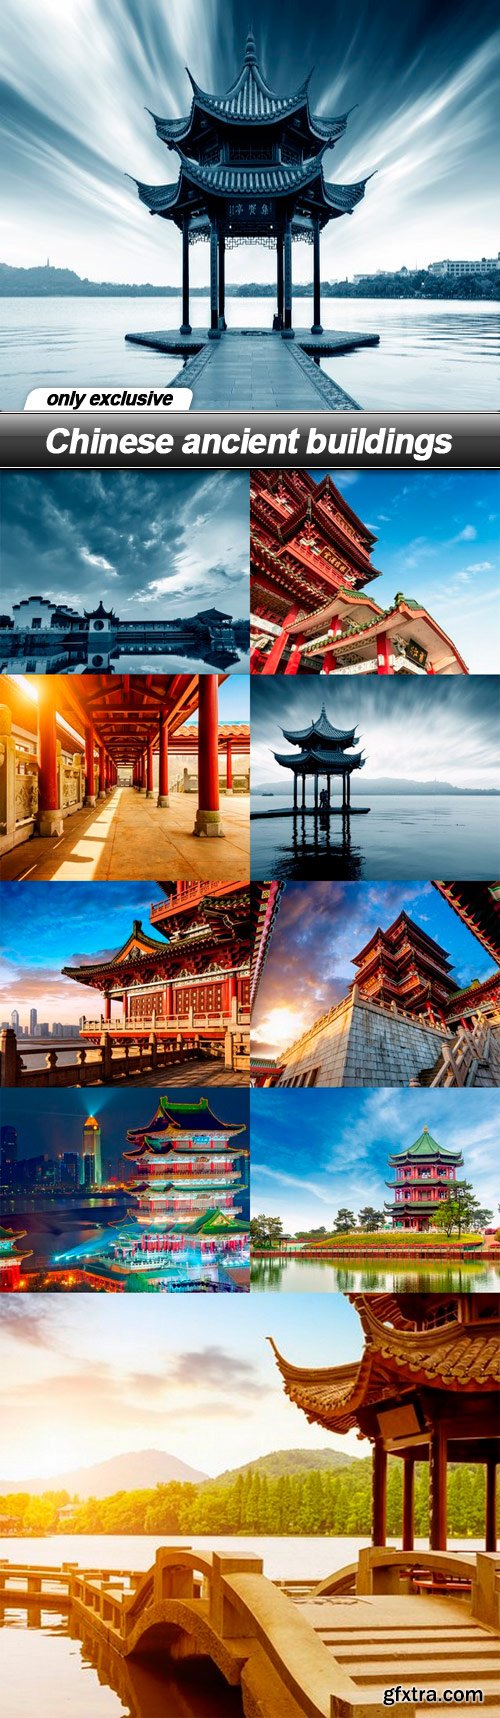 Chinese ancient buildings - 10 UHQ JPEG